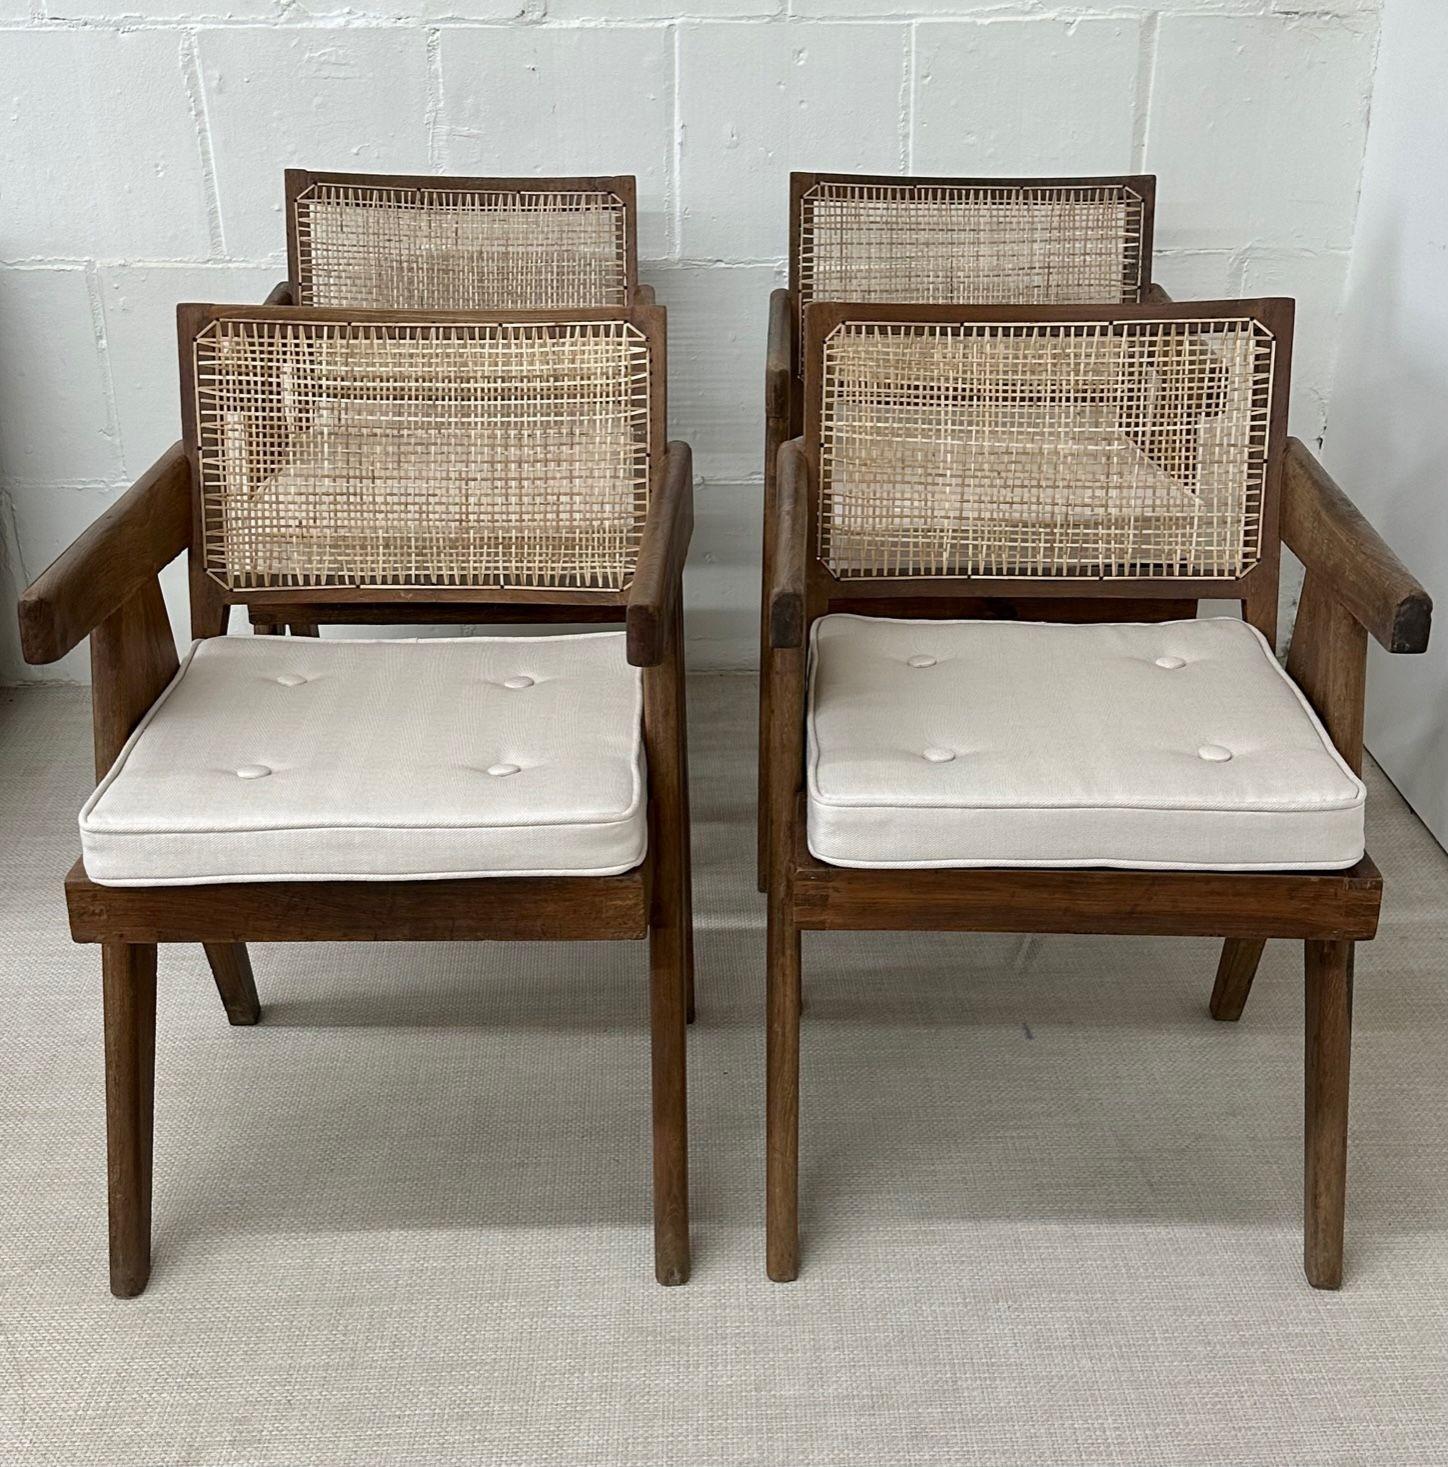 Pierre Jeanneret, Mid-Century Modern, Dining Chairs, Teak, Cane, India, 1960s 9